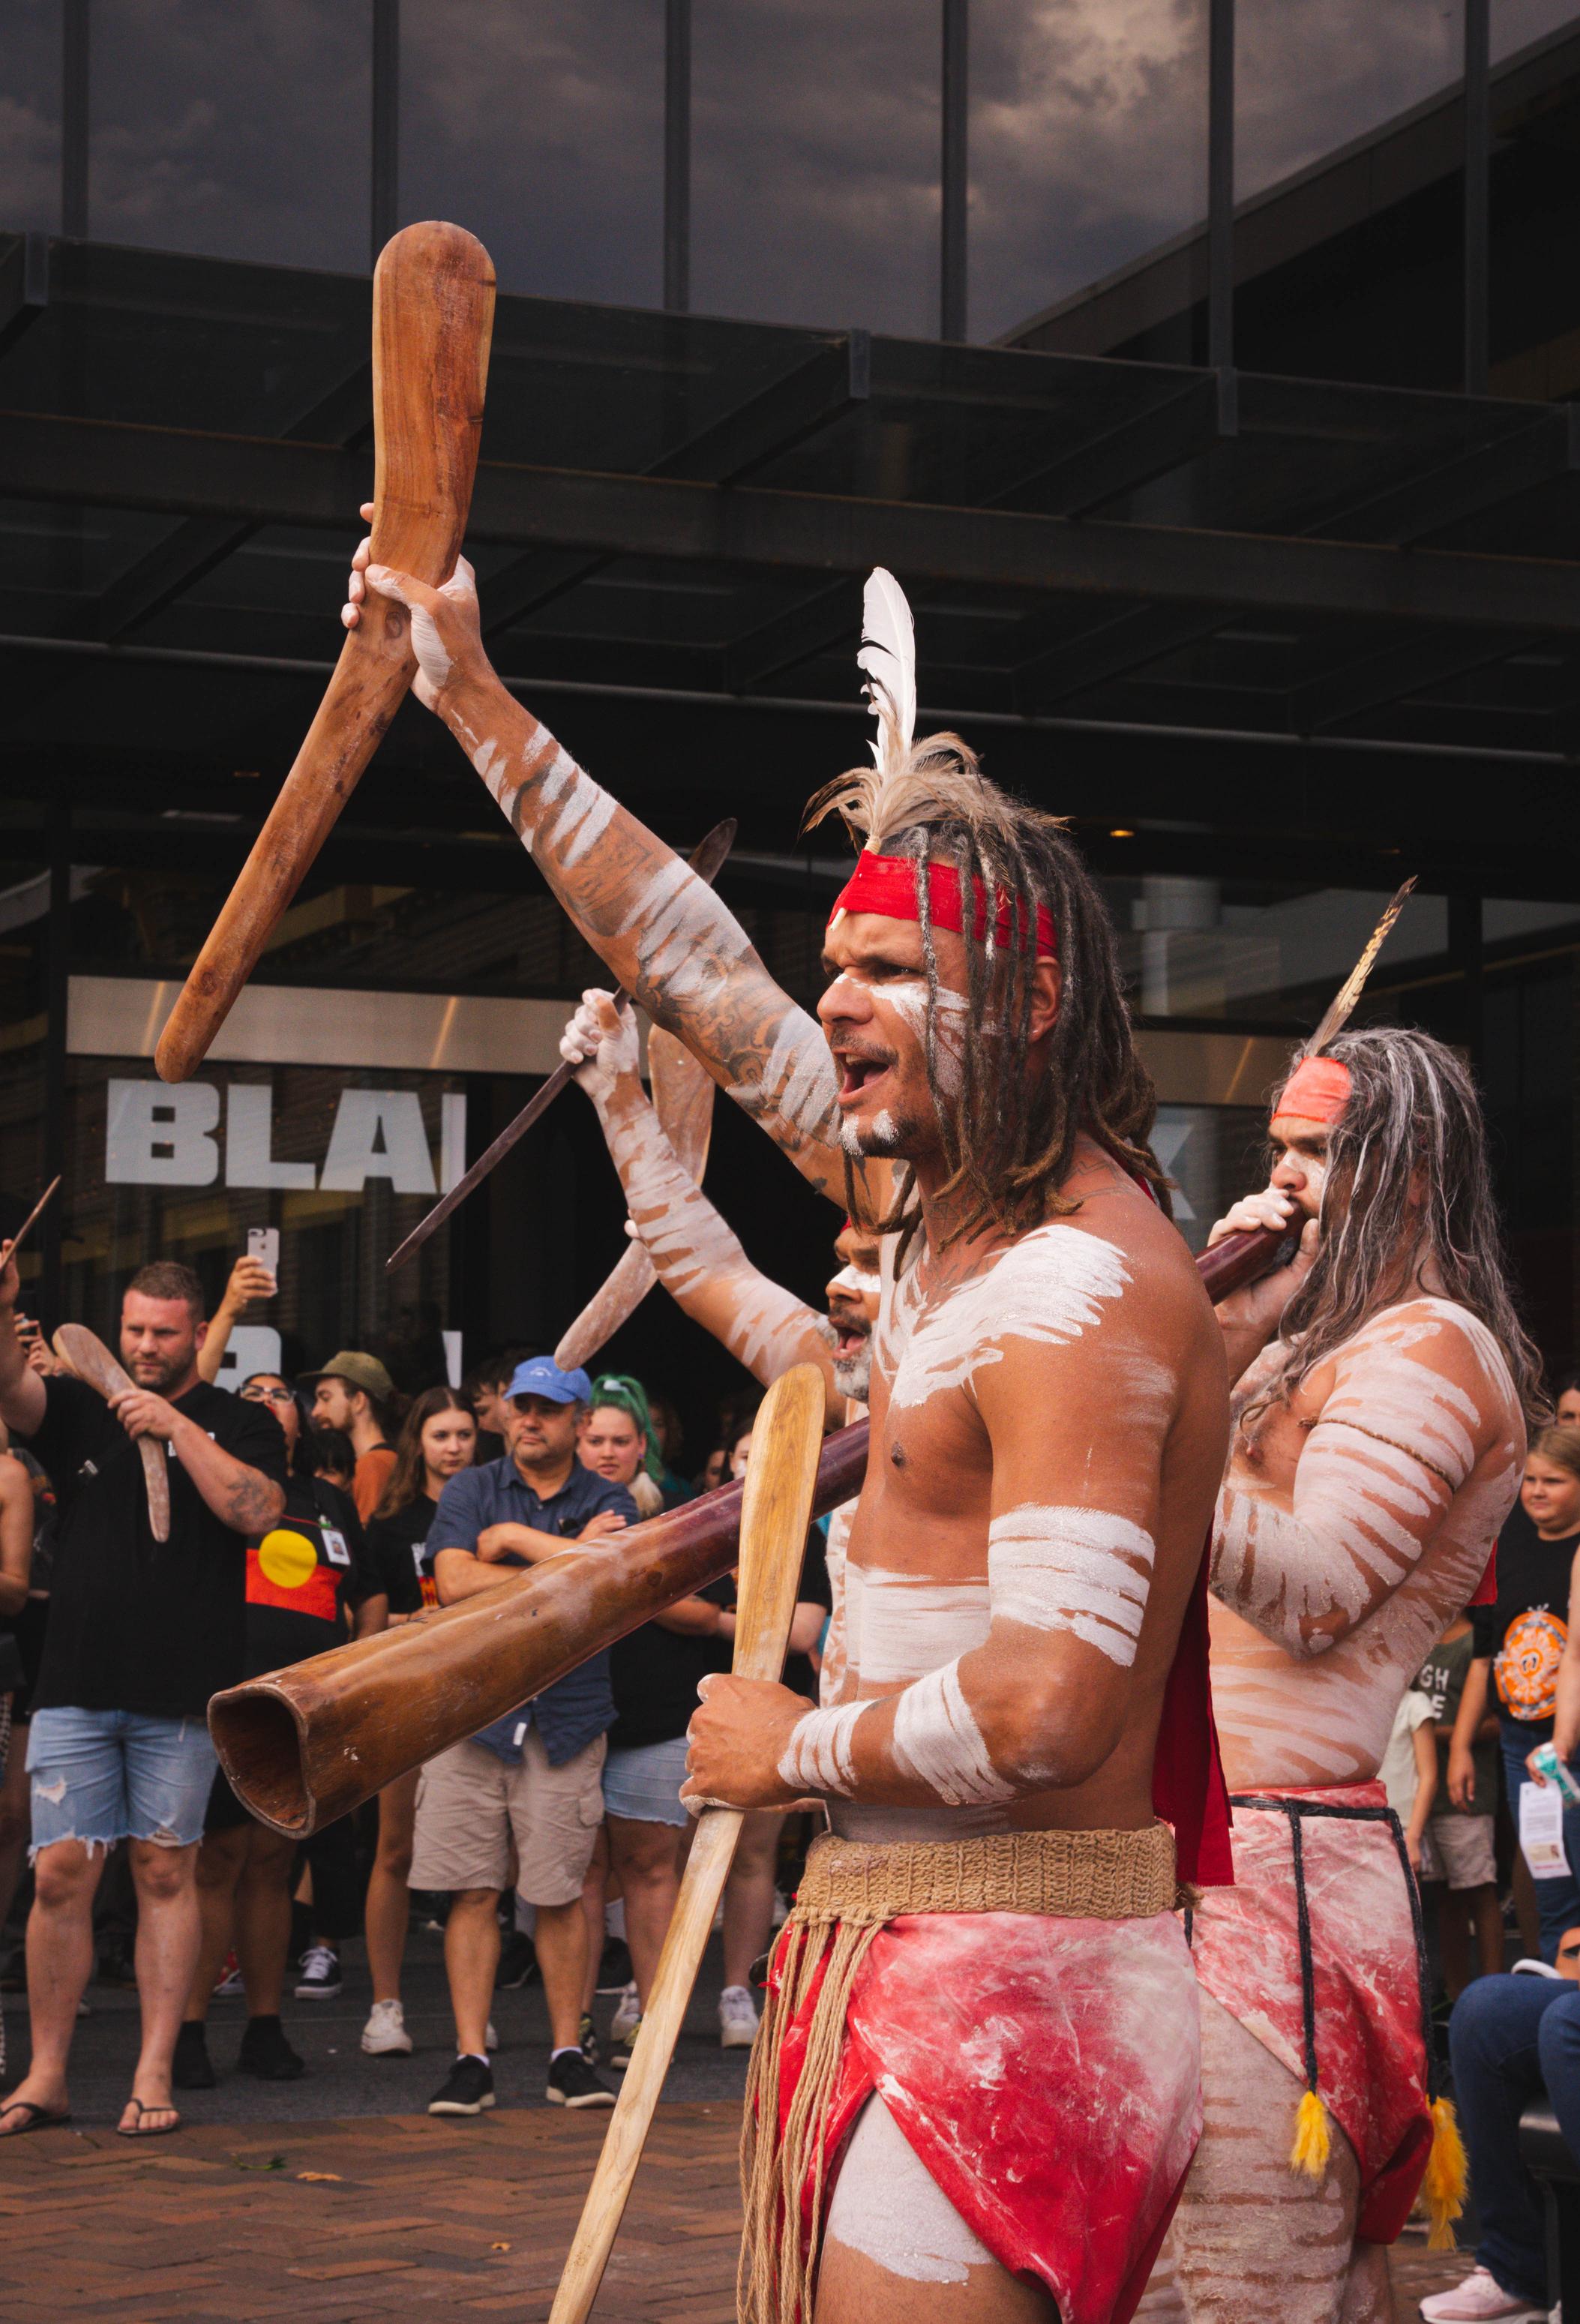 A First Nations performer in traditional dress is mid performance and is holding boomerang in his right hand.